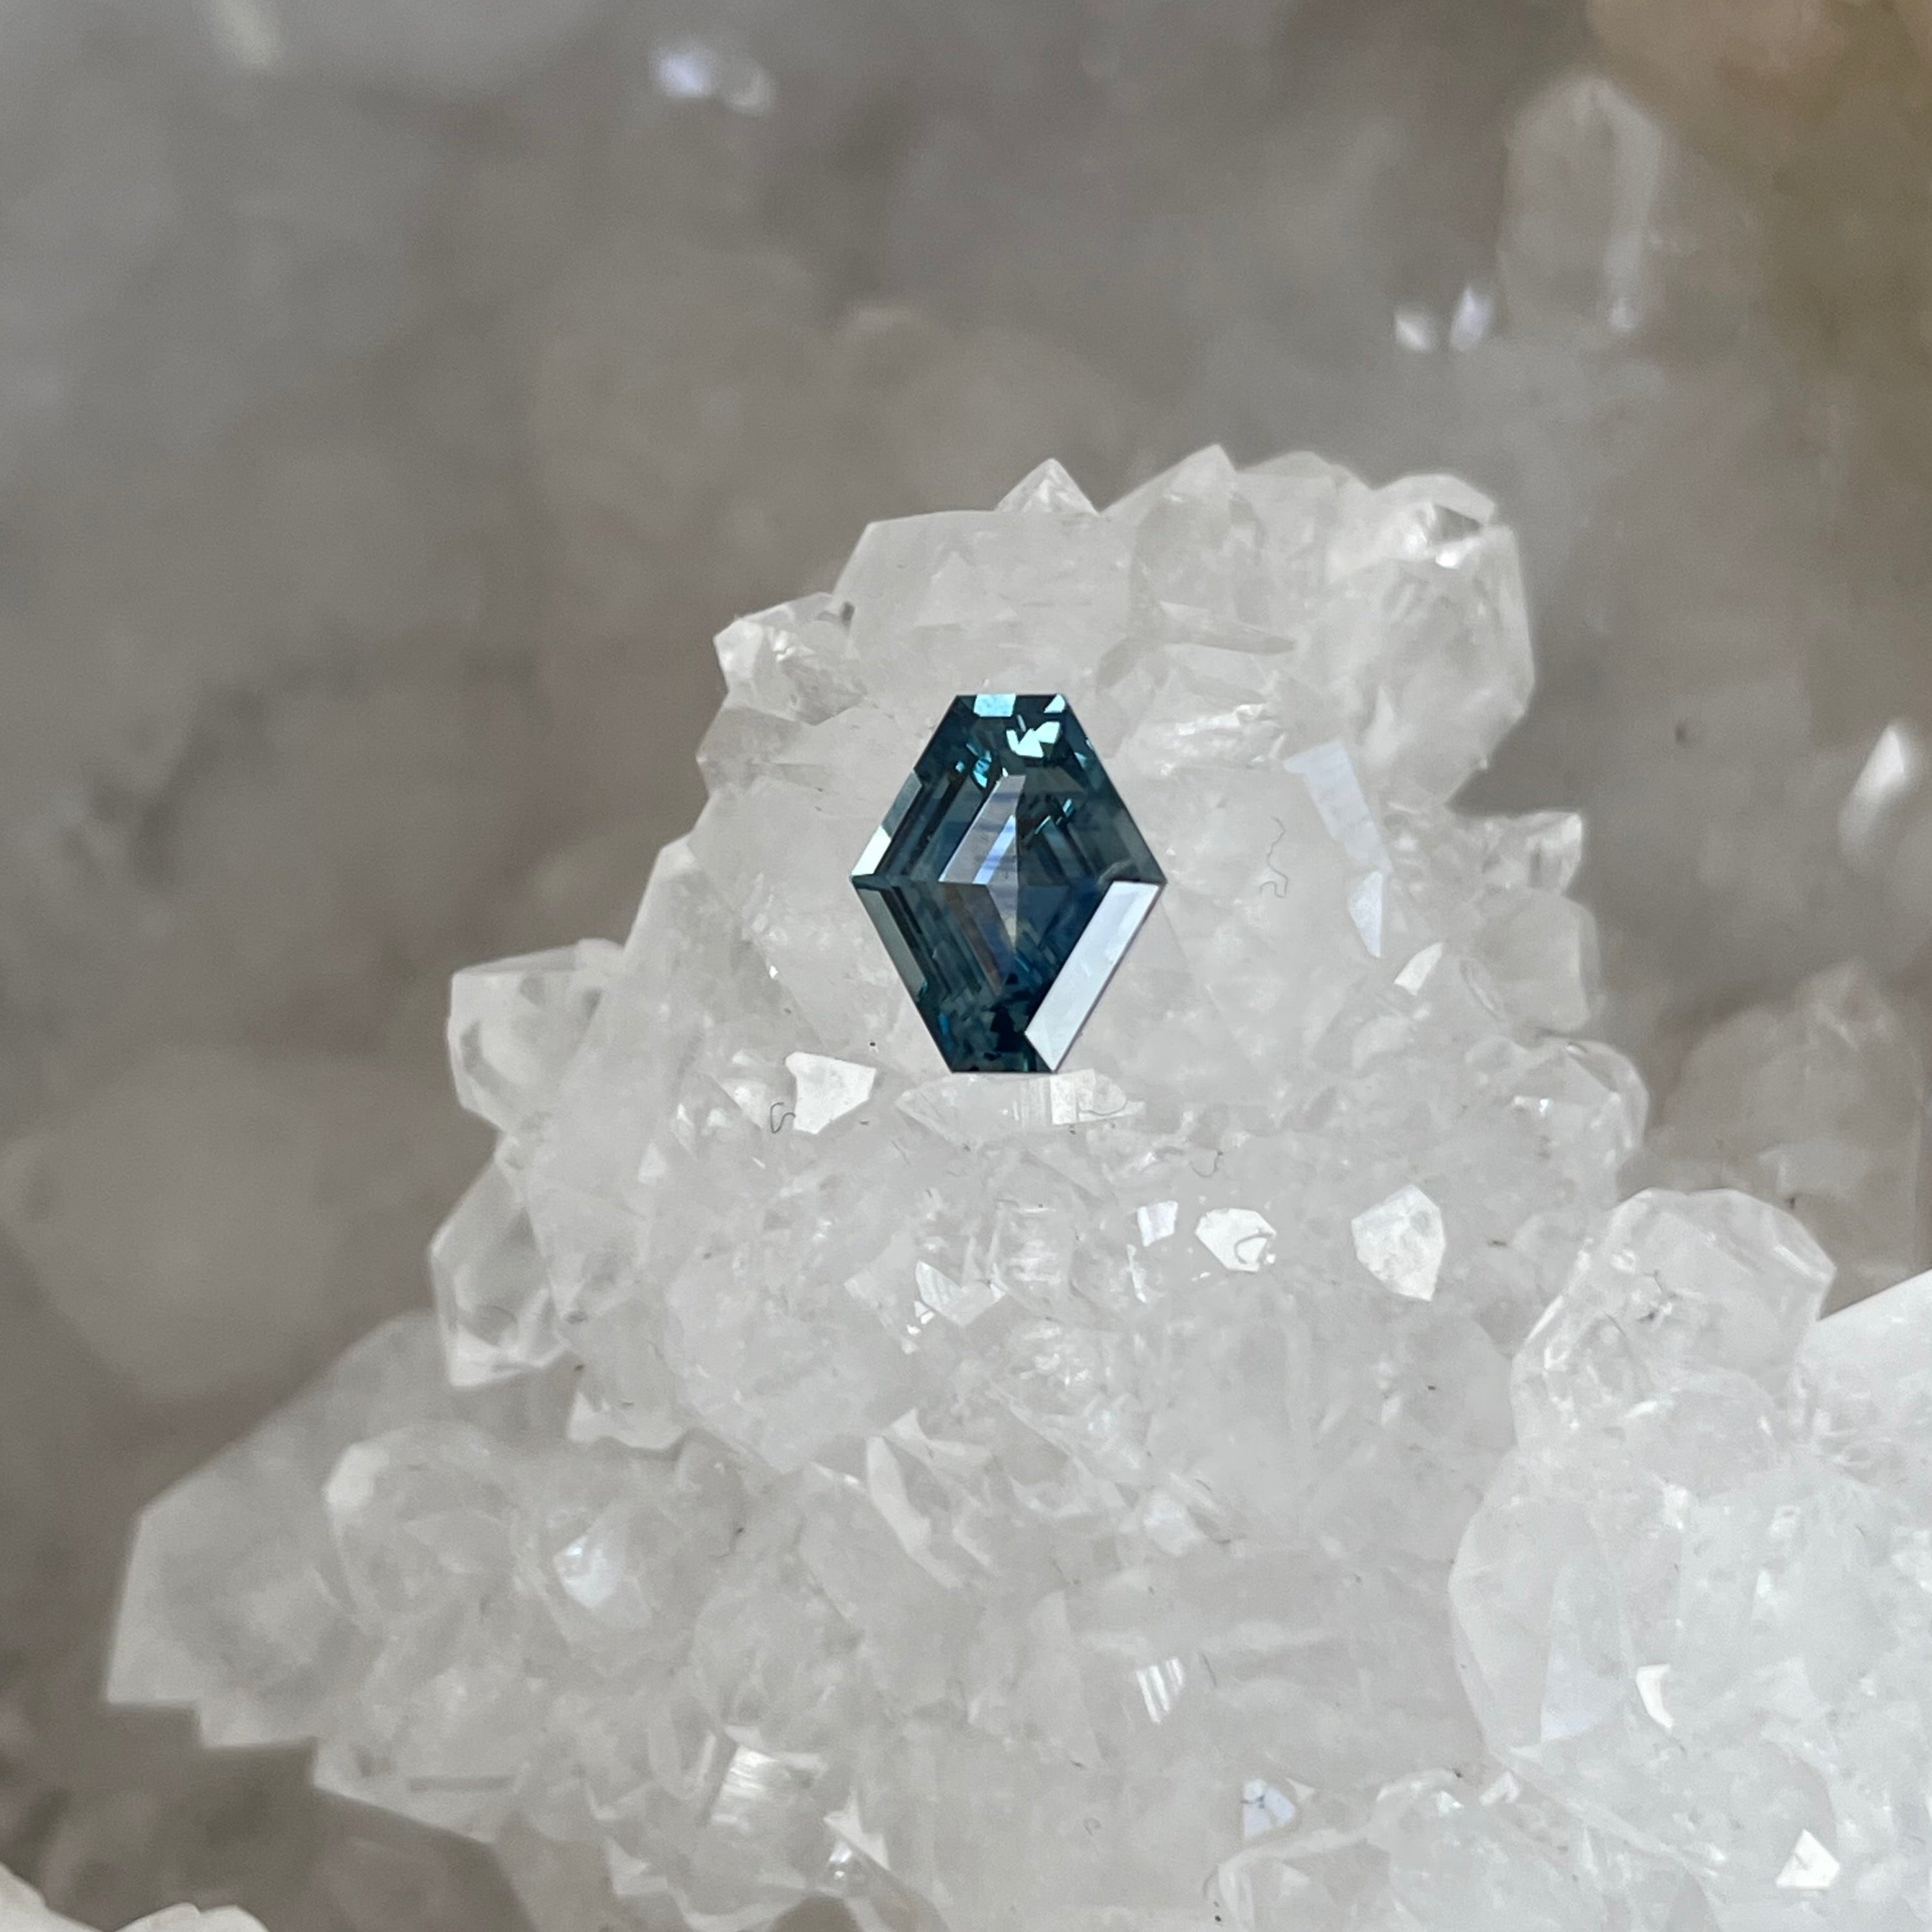 Montana Sapphire 1.24 CT Blue White Stretched Hexagon Cut